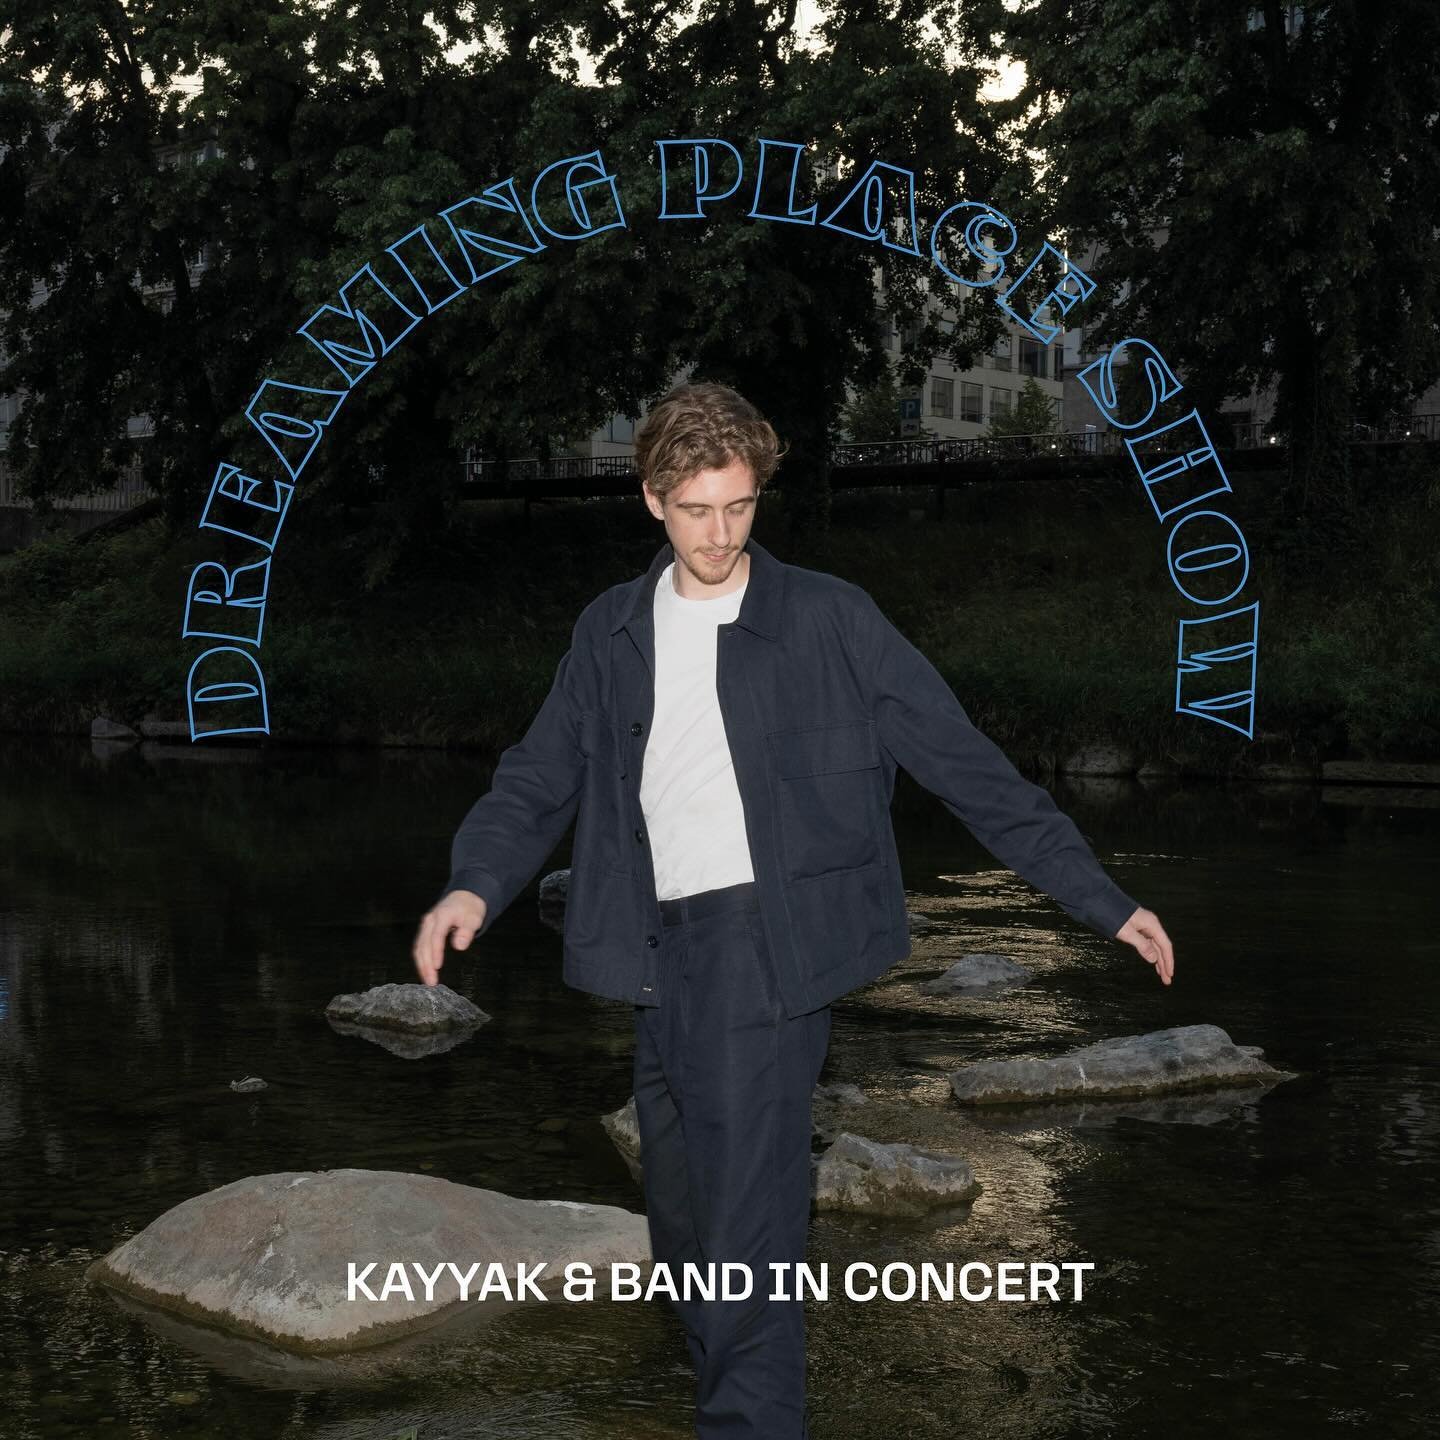 For the first time ever: KAYYAK live! Swiss disco phenom @kayyak_music has assembled an all-star band to play his debut live show, exclusively for Detour Discotheque. 

In the beautiful Trinkhalle (a 19th century drinking hall in the forest outside I